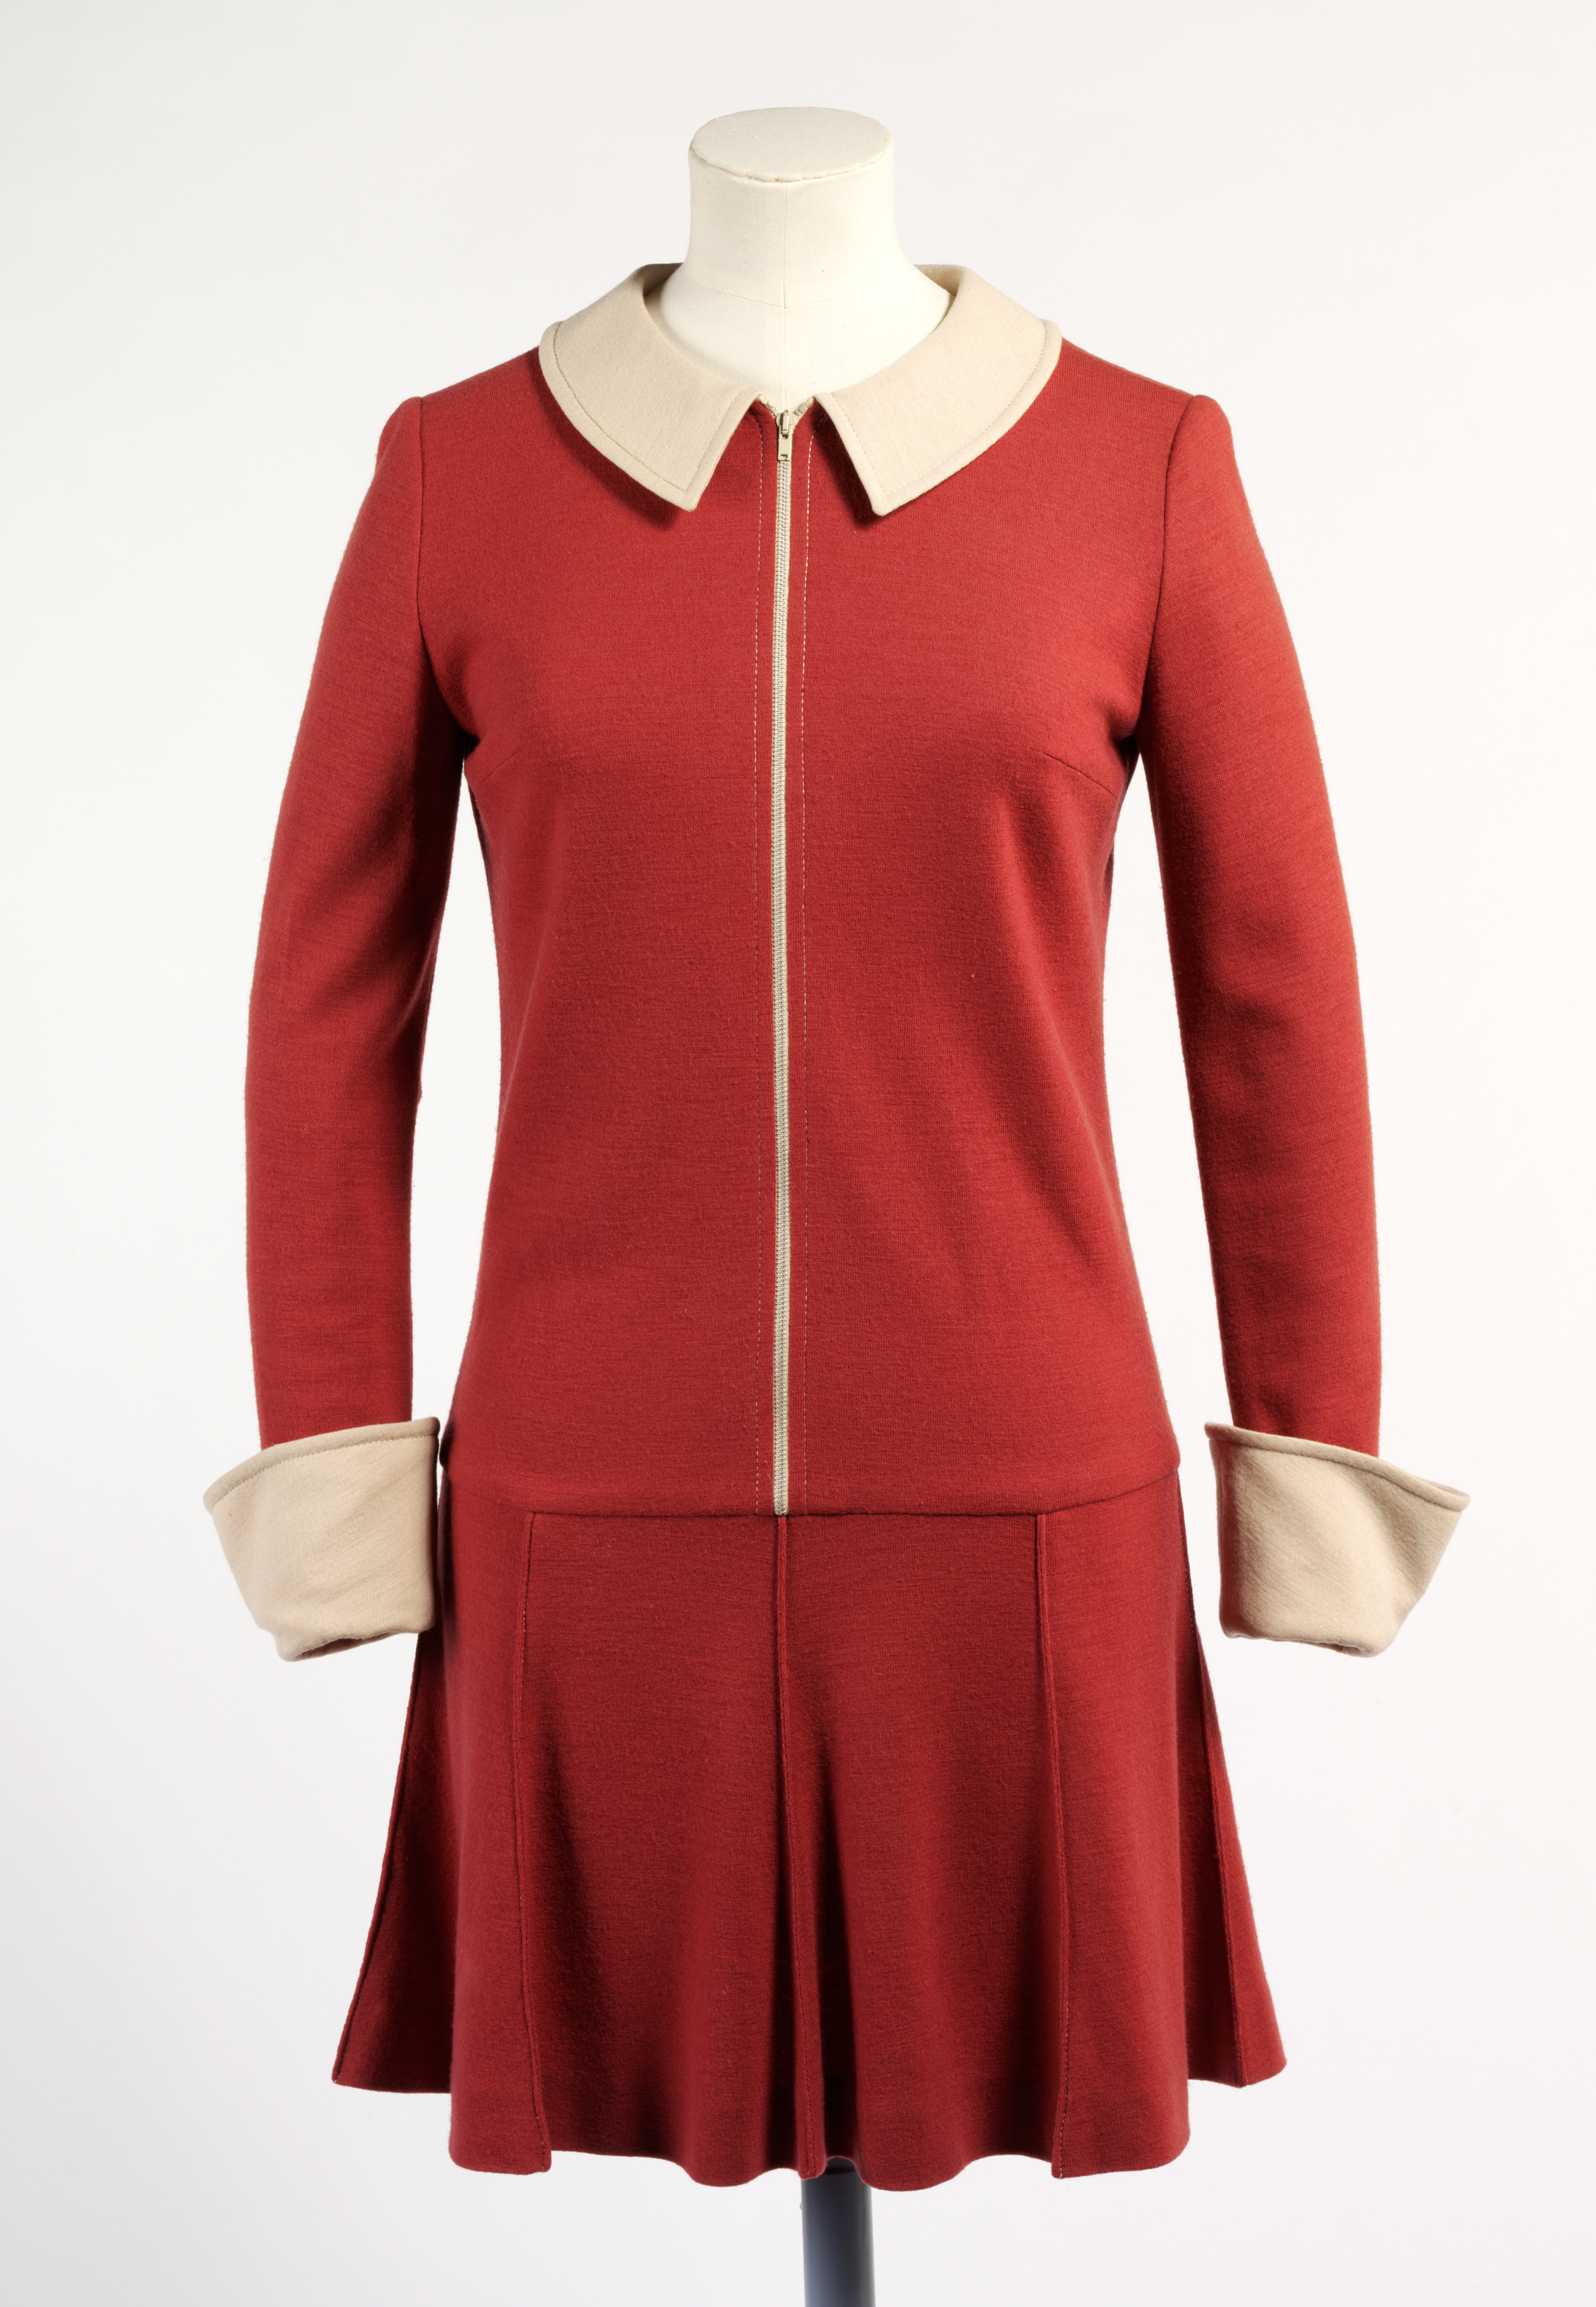 Mary Quant wool jersey dress, with cream Peter Pan collar (Victoria And Albert Museum, London)